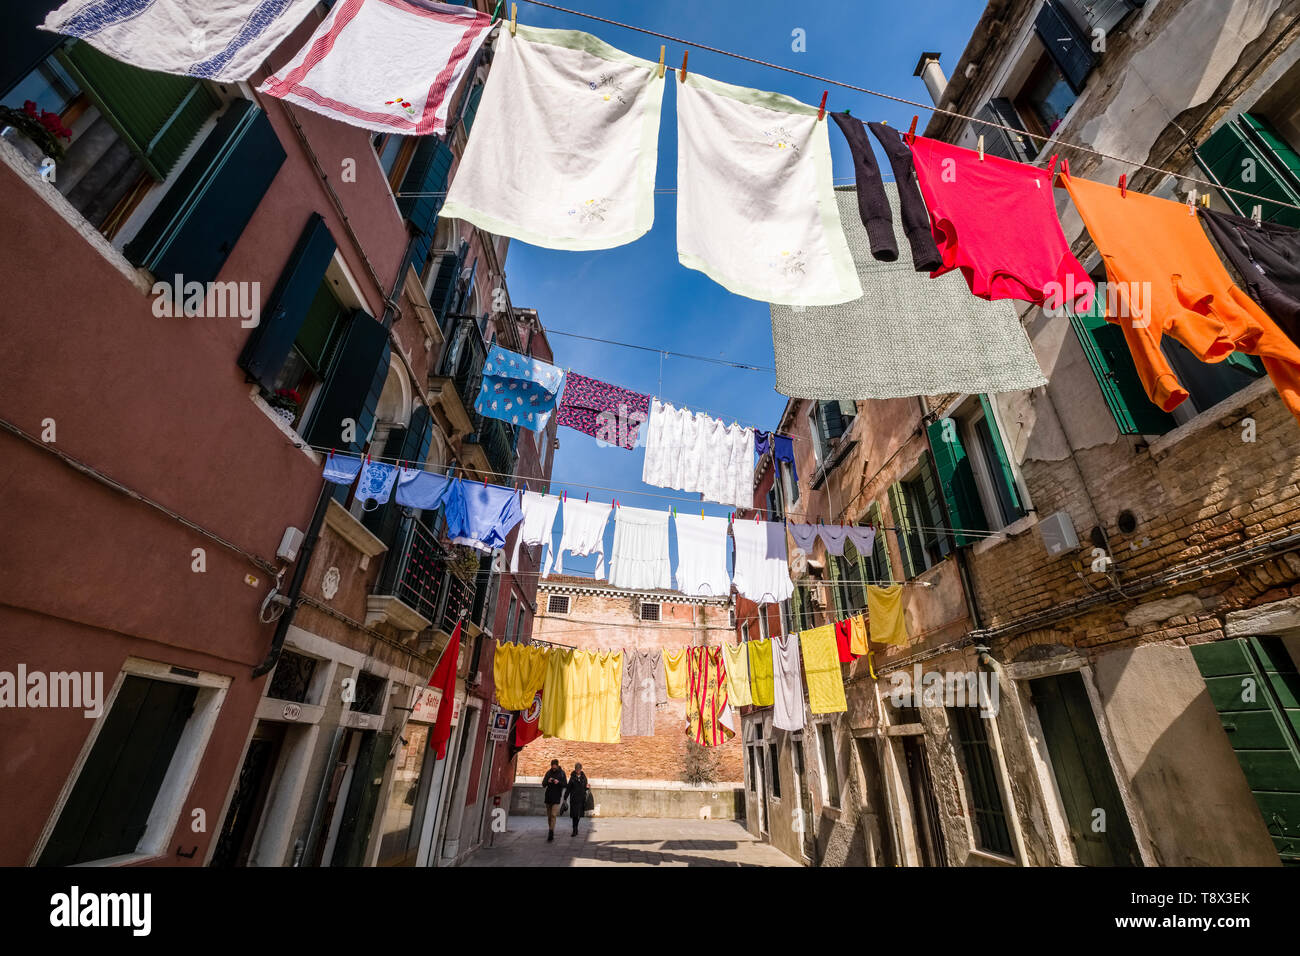 Narrow street leading through the ailing brick houses of the so-called 'Floating city', laundry is put up on washing lines Stock Photo